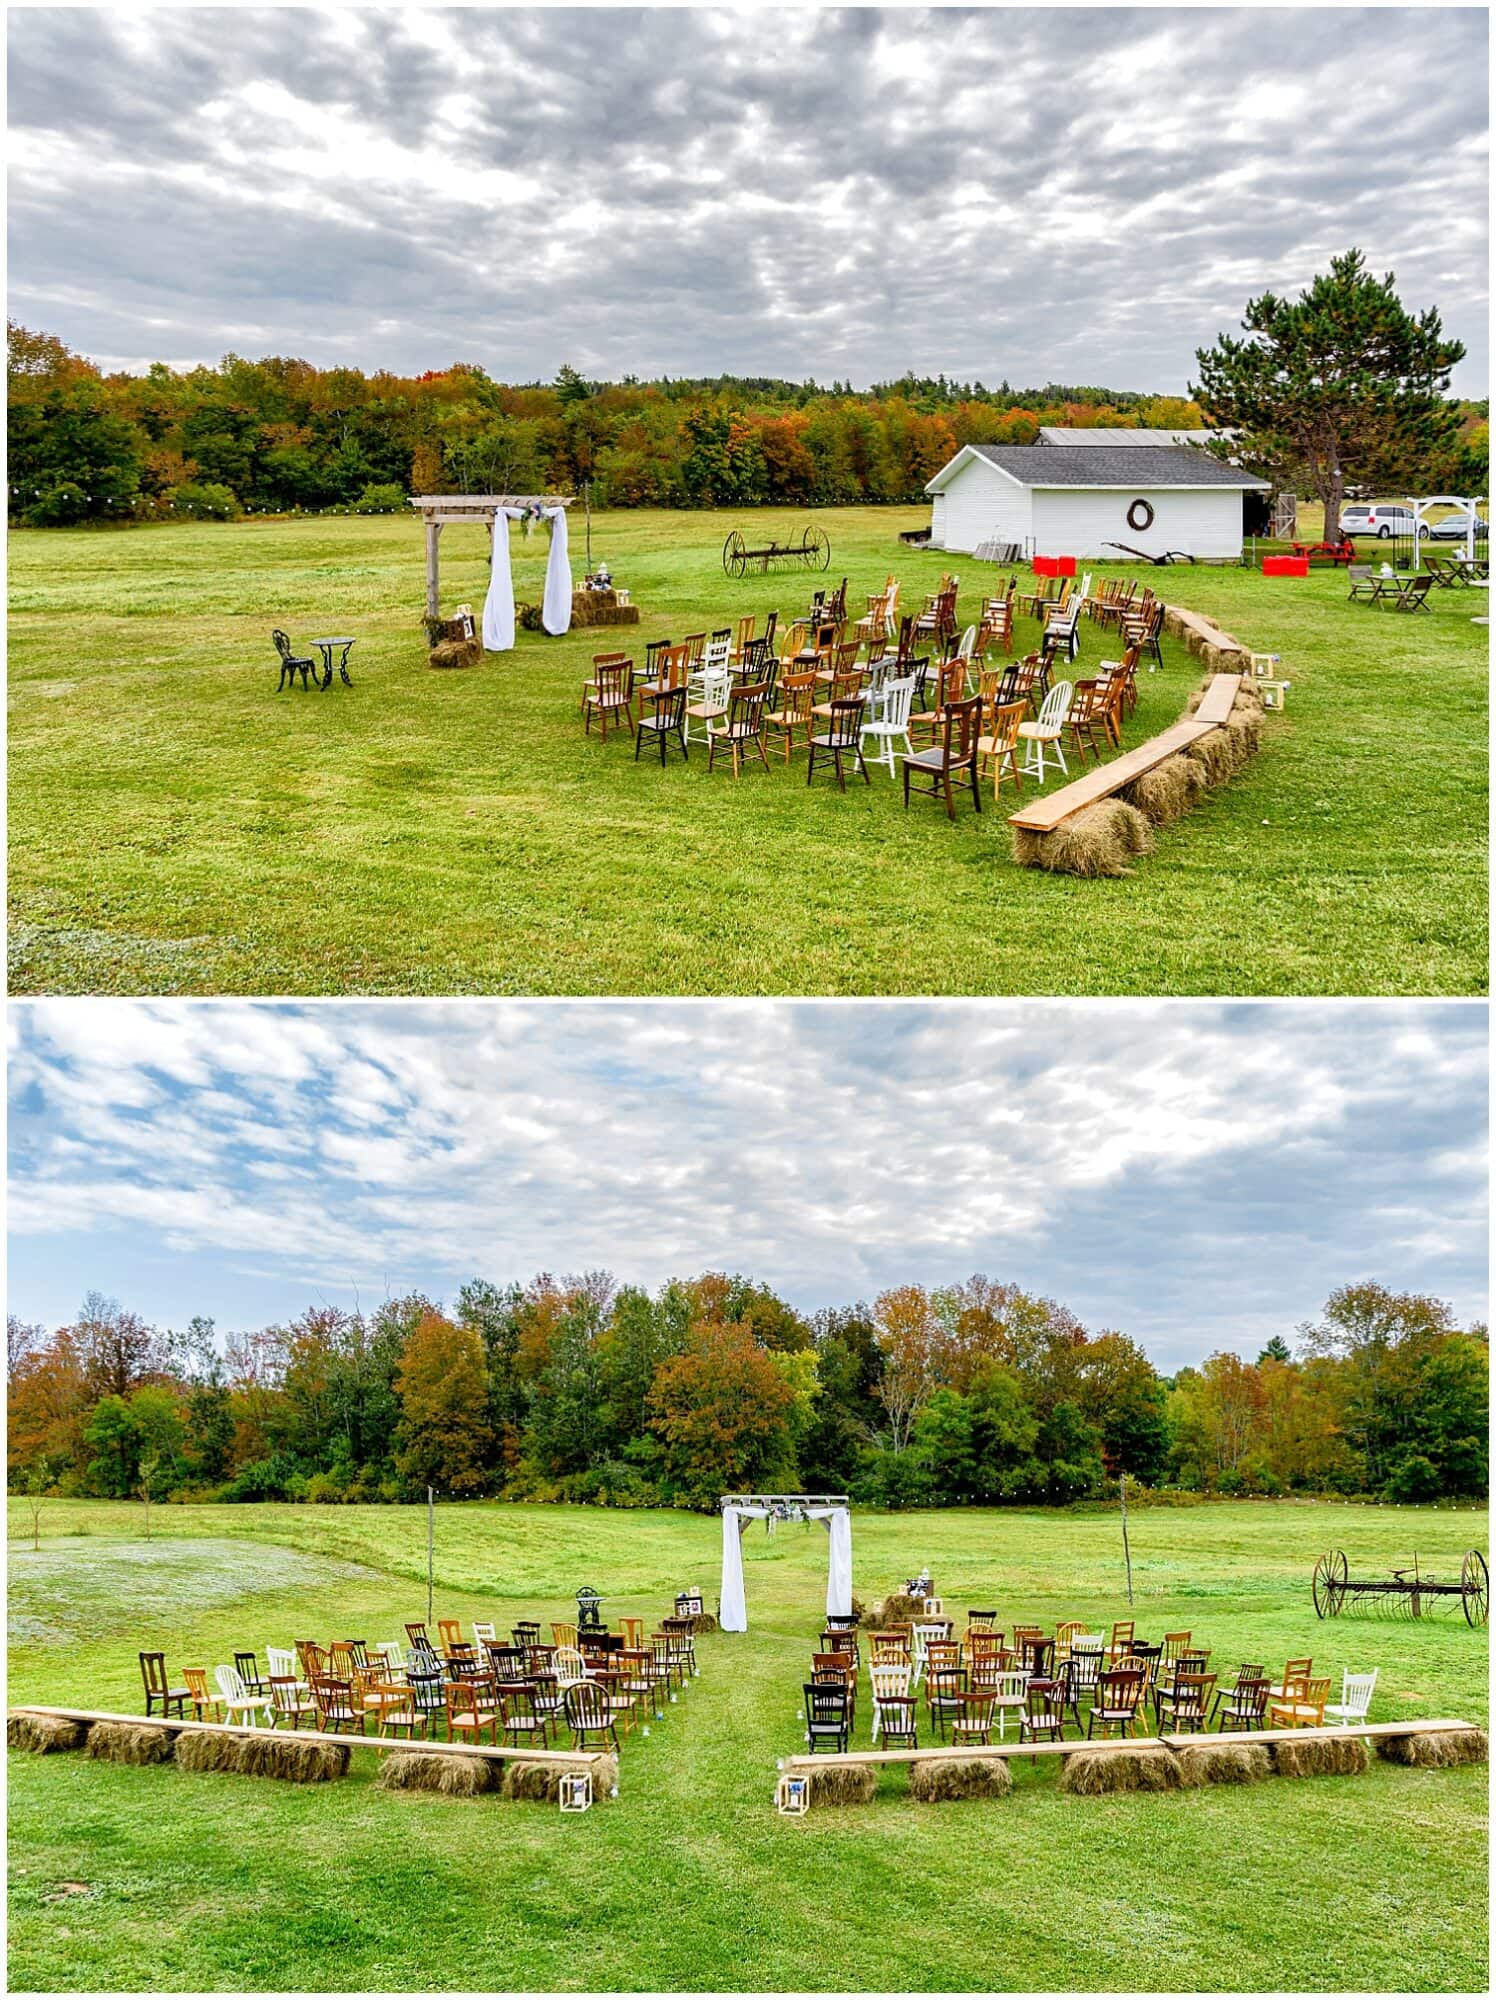 The wedding ceremony set up at the barn at Sadie Belle Farm in Hantsport NS.